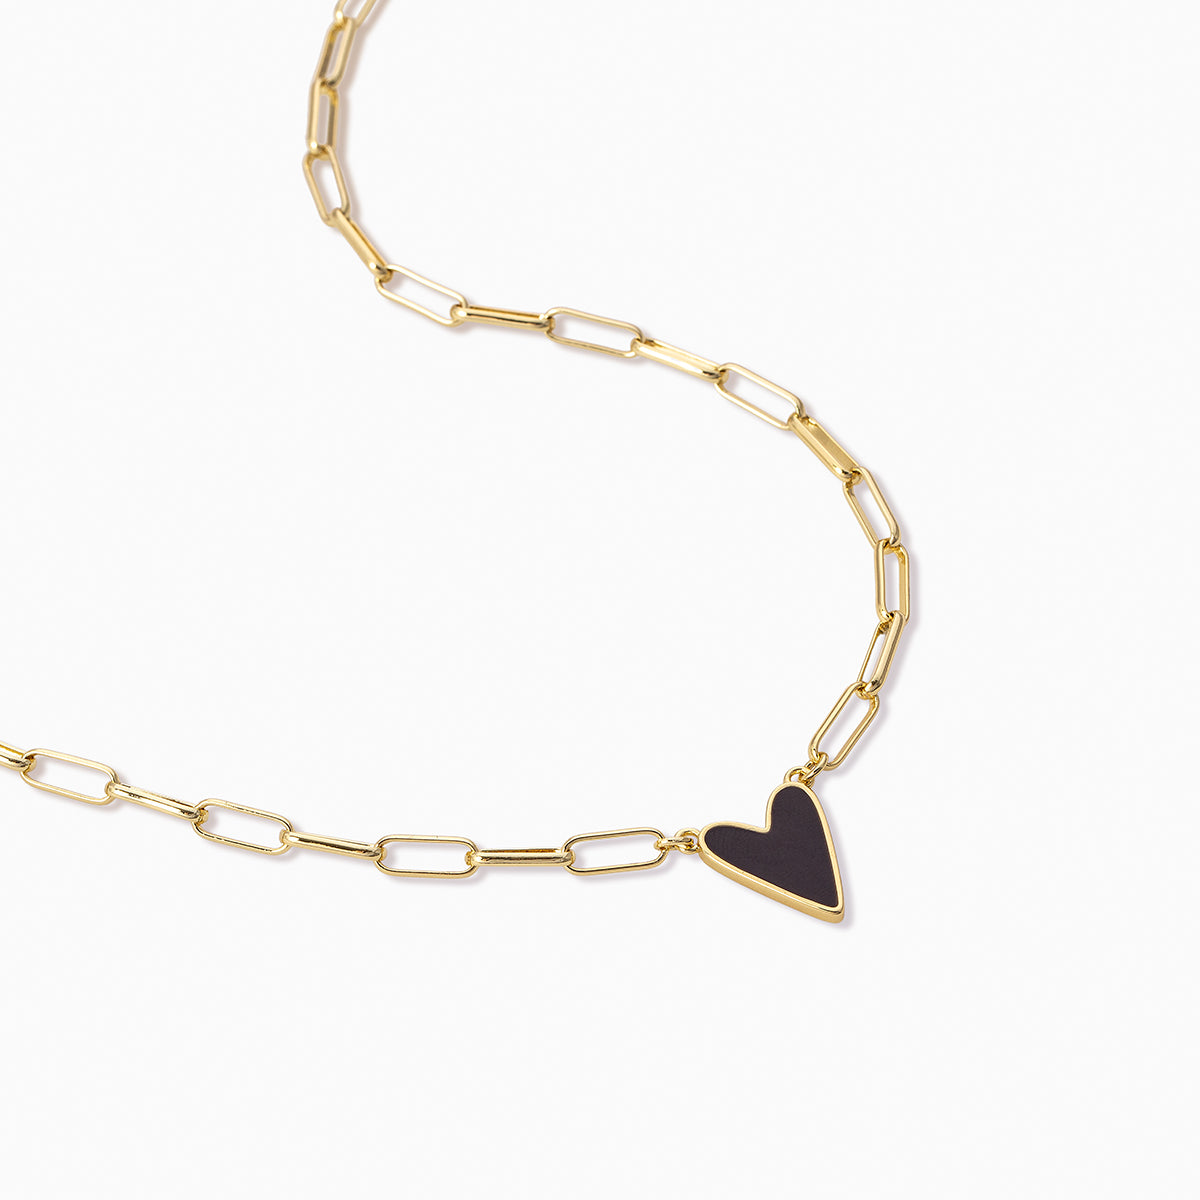 Gold Pure Heart White Pendant Necklace | Women's Jewelry by Uncommon James